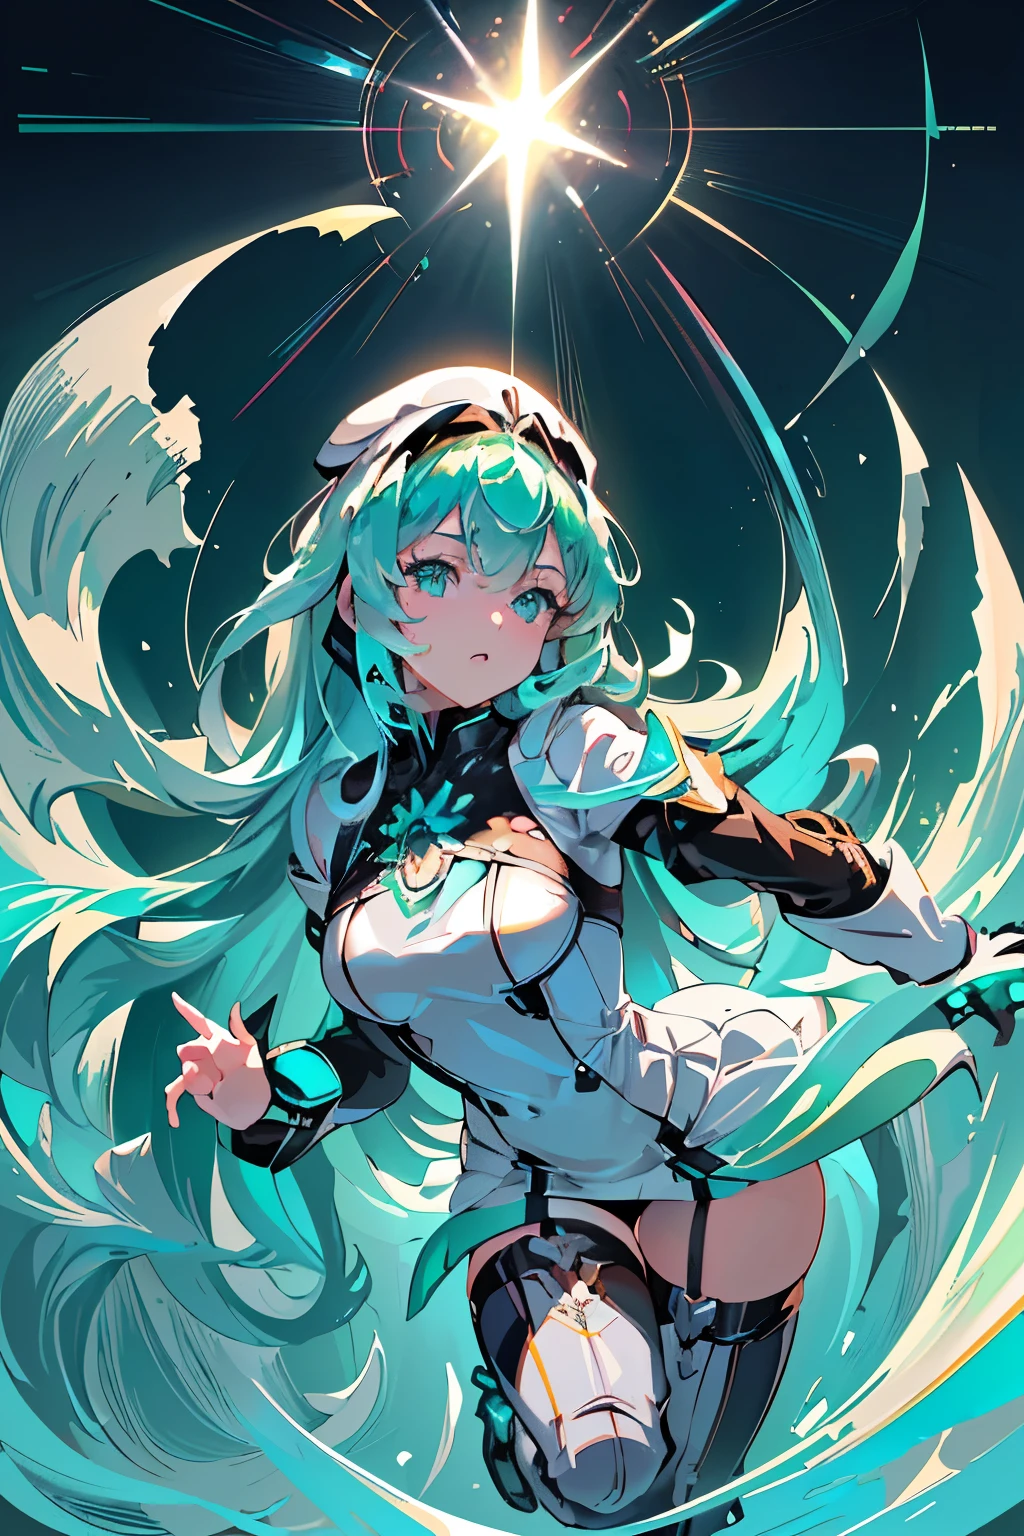 Anime, Girl, (((1girl))), (((Waifu, Xenoblade Chronicles 2, Pneuma Waifu))), (((Seafoam Green Hair, Long Hair))), ((Seafoam Green Eyes eyes:1.3, Upturned Eyes: 1, Perfect Eyes, Beautiful Detailed Eyes, Gradient eyes: 1, Finely Detailed Beautiful Eyes: 1, Symmetrical Eyes: 1, Big Highlight On Eyes: 1.2)), (((Lustrous Skin: 1.5, Bright Skin: 1.5, Skin Fair, Shiny Skin, Very Shiny Skin, Shiny Body, Plastic Glitter Skin, Exaggerated Shiny Skin, Illuminated Skin))), (Detailed Body, (Detailed Face)), Young, Idol Pose, (Best Quality), Techwear, (((Military Uniform))), (((Military Cap))), (((Military Coat))), (((Thigh-high Heeled Boots))), High Resolution, Sharp Focus, Ultra Detailed, Extremely Detailed, Extremely High Quality Artwork, (Realistic, Photorealistic: 1.37), 8k_Wallpaper, (Extremely Detailed CG 8k), (Very Fine 8K CG), ((Hyper Super Ultra Detailed Perfect Piece)), (((Flawlessmasterpiece))), Illustration, Vibrant Colors, (Intricate), High Contrast, Selective Lighting, Double Exposure, HDR (High Dynamic Range), Post-processing, Background Blur